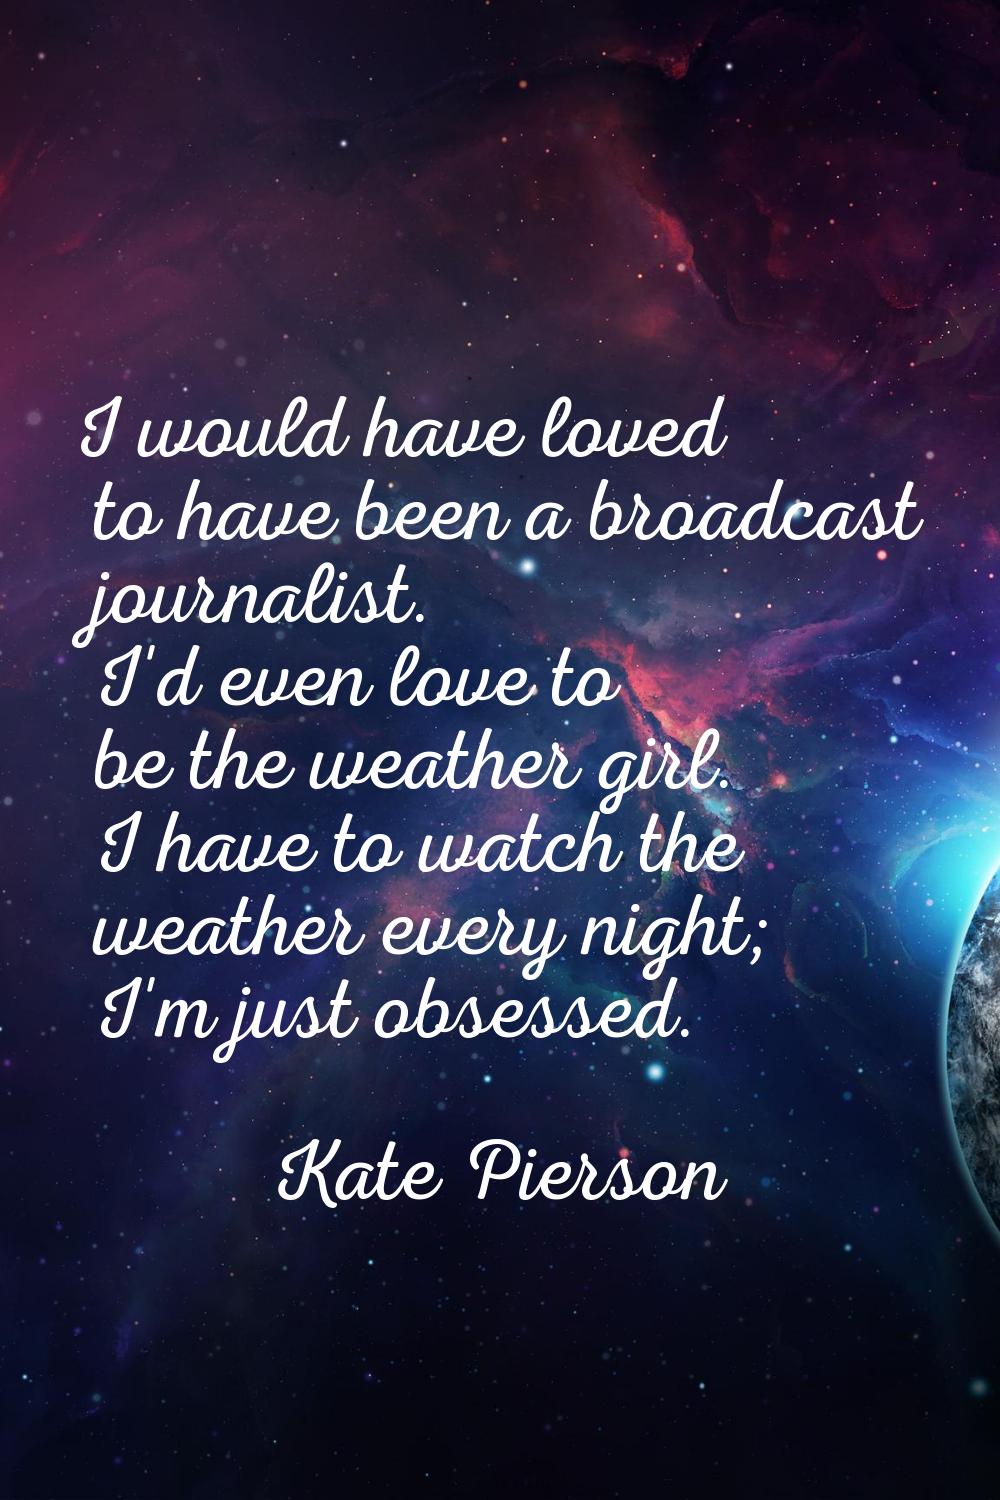 I would have loved to have been a broadcast journalist. I'd even love to be the weather girl. I hav